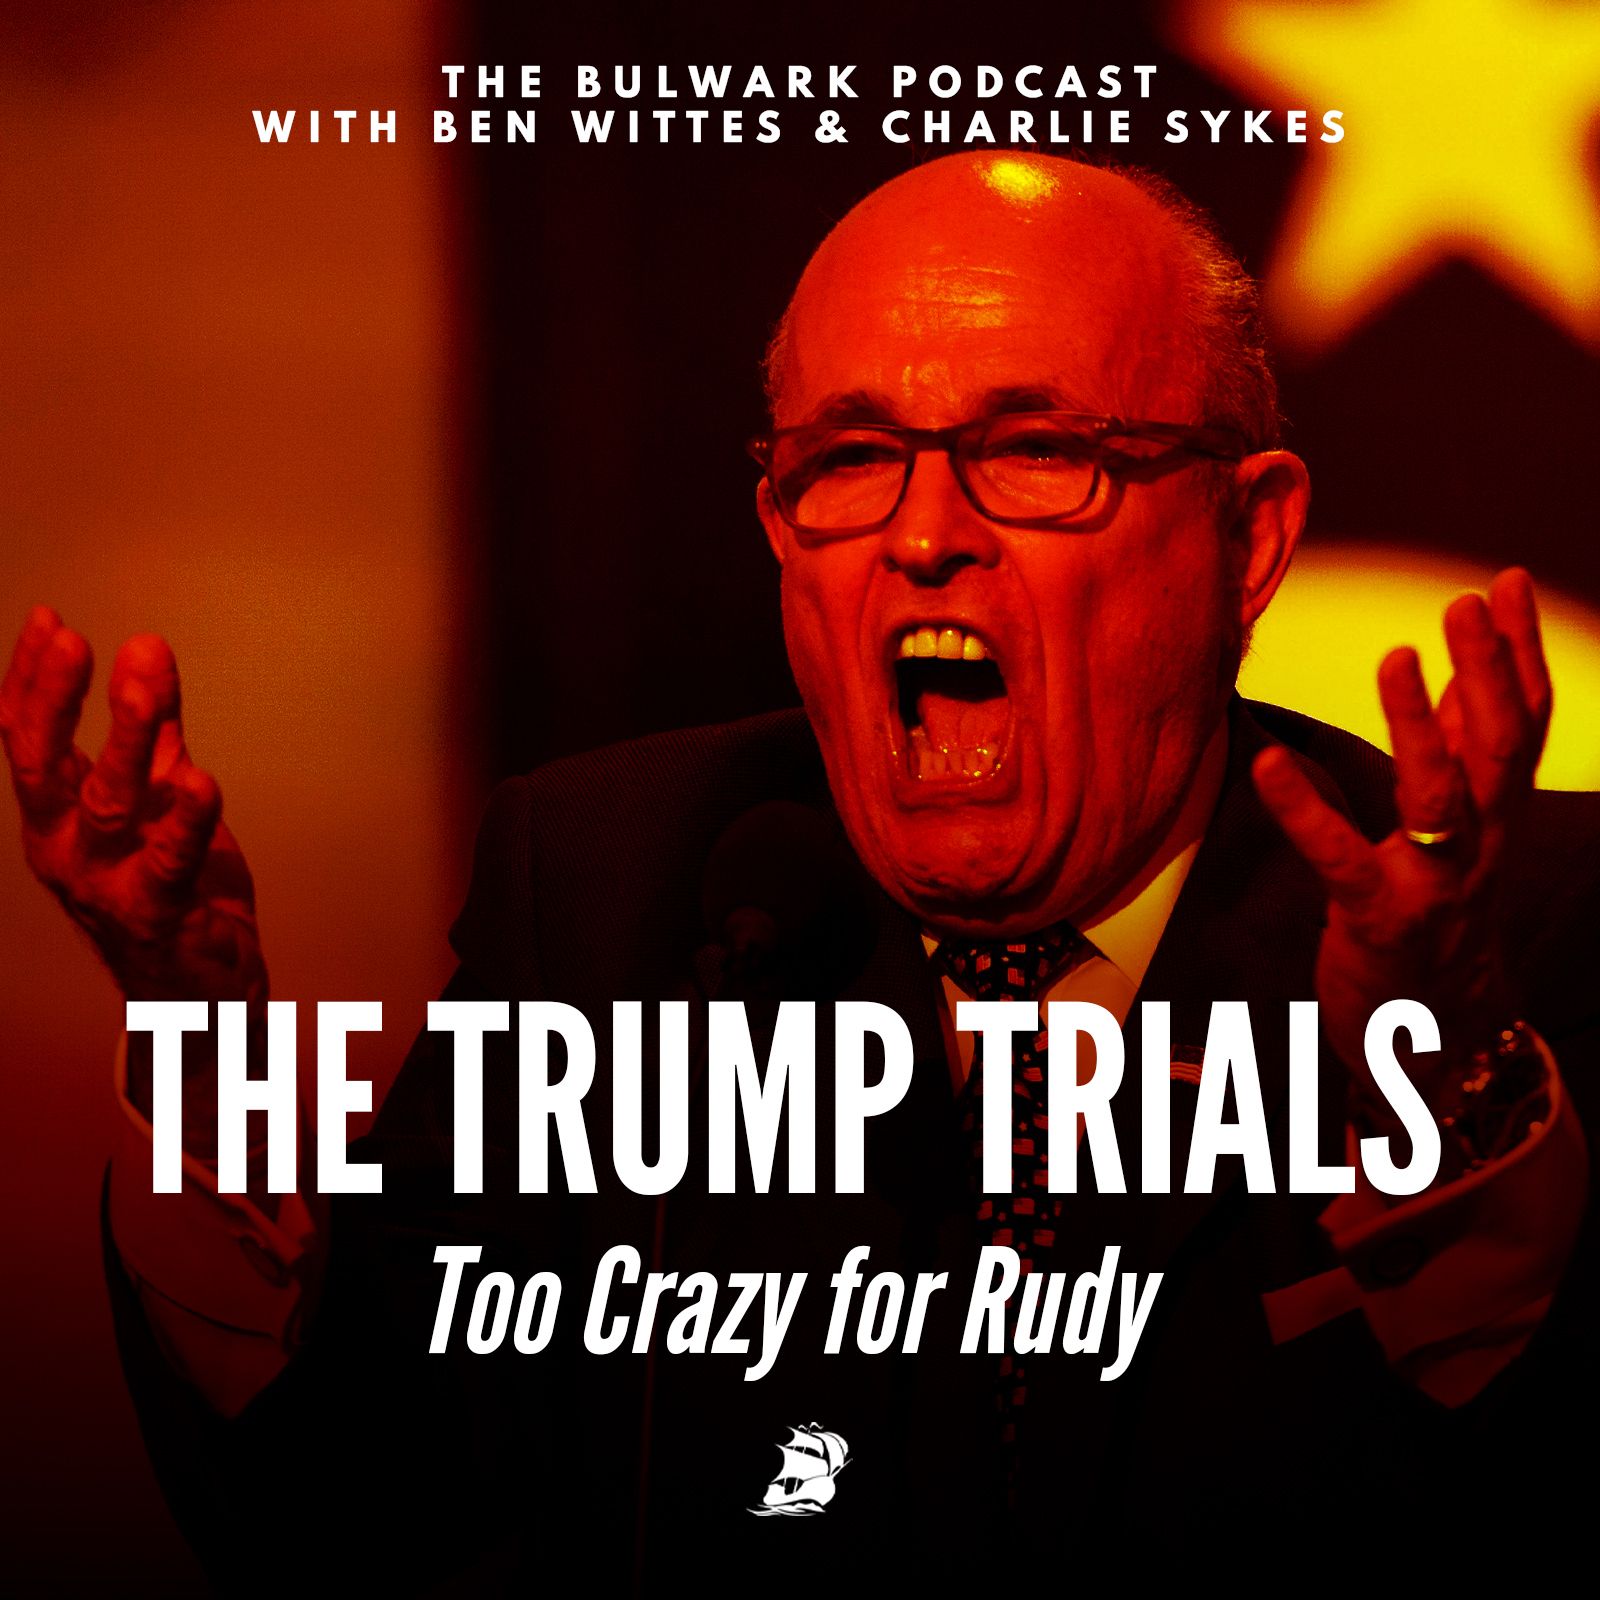 Too Crazy for Rudy